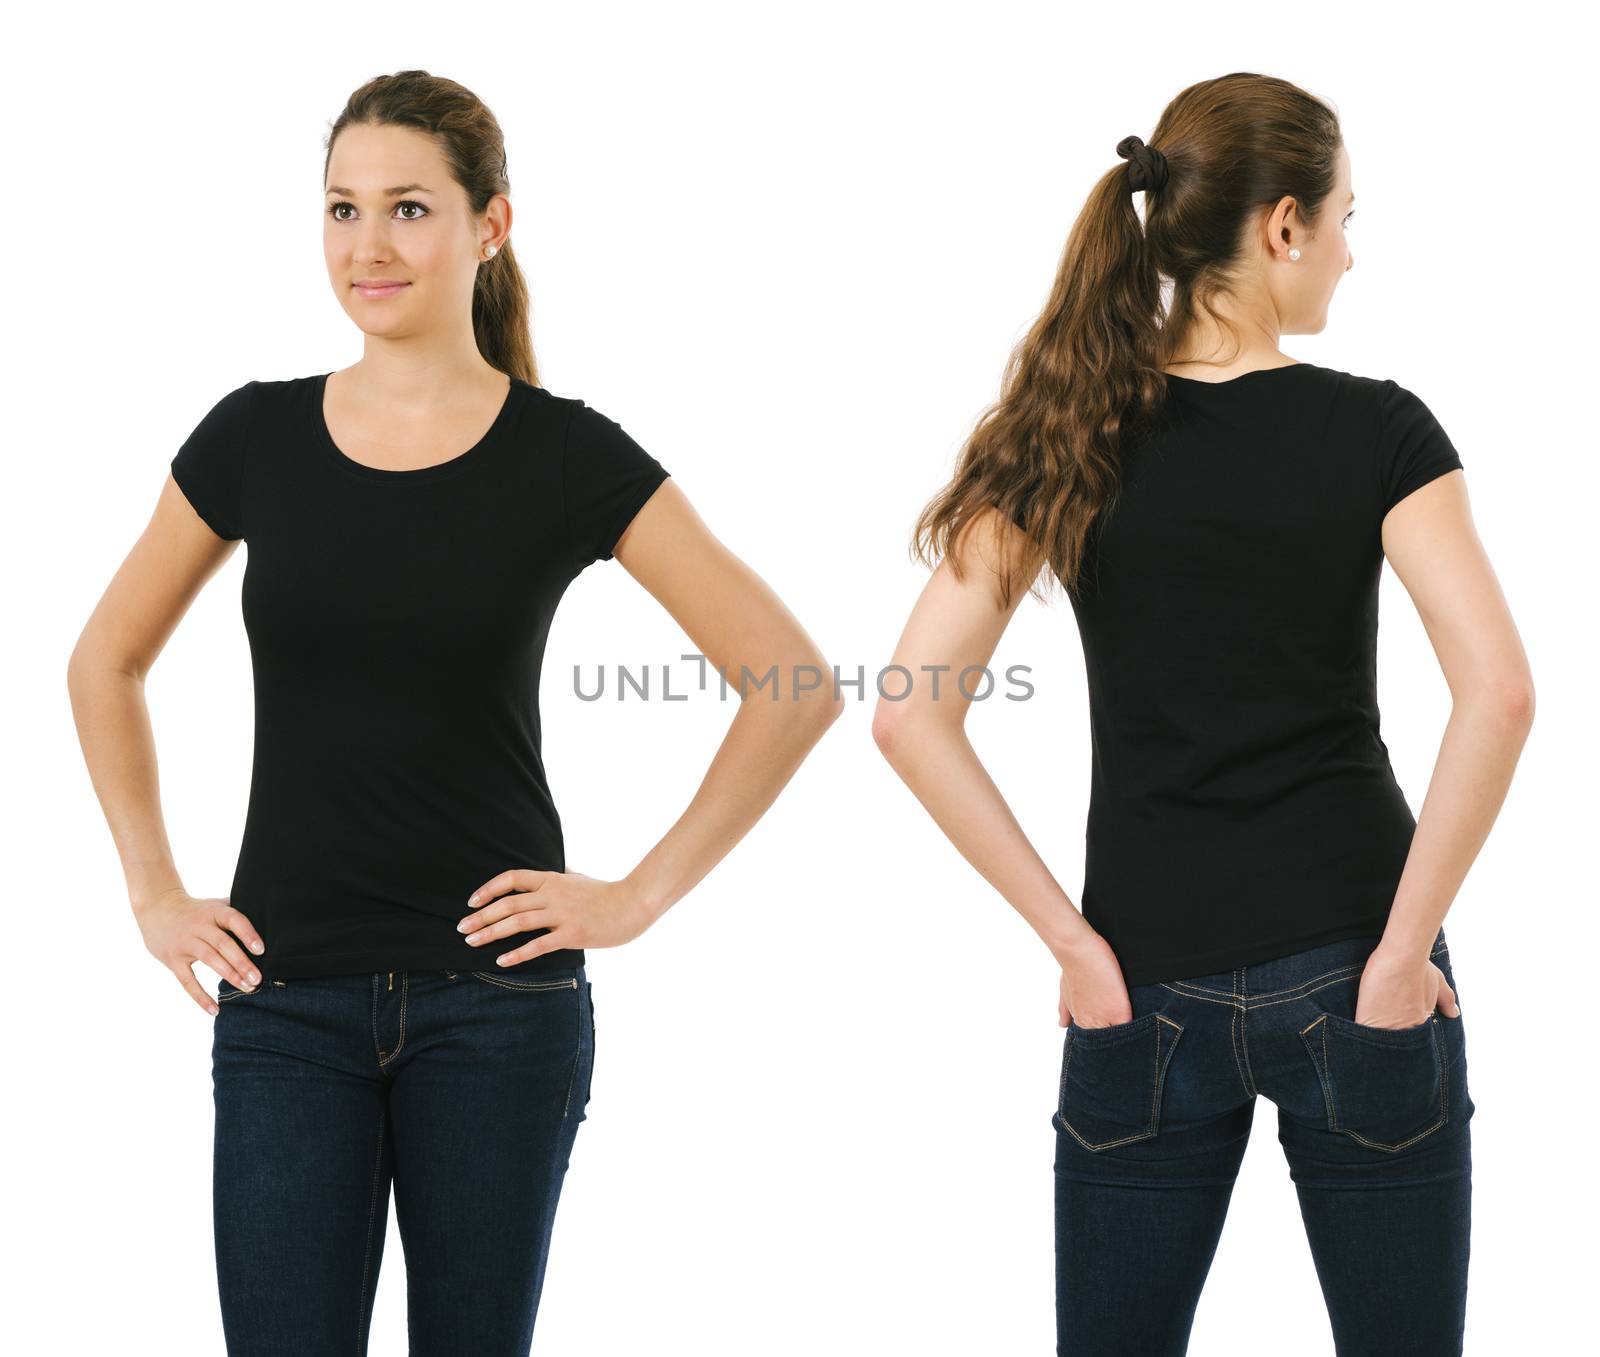 Smiling woman wearing blank black shirt by sumners